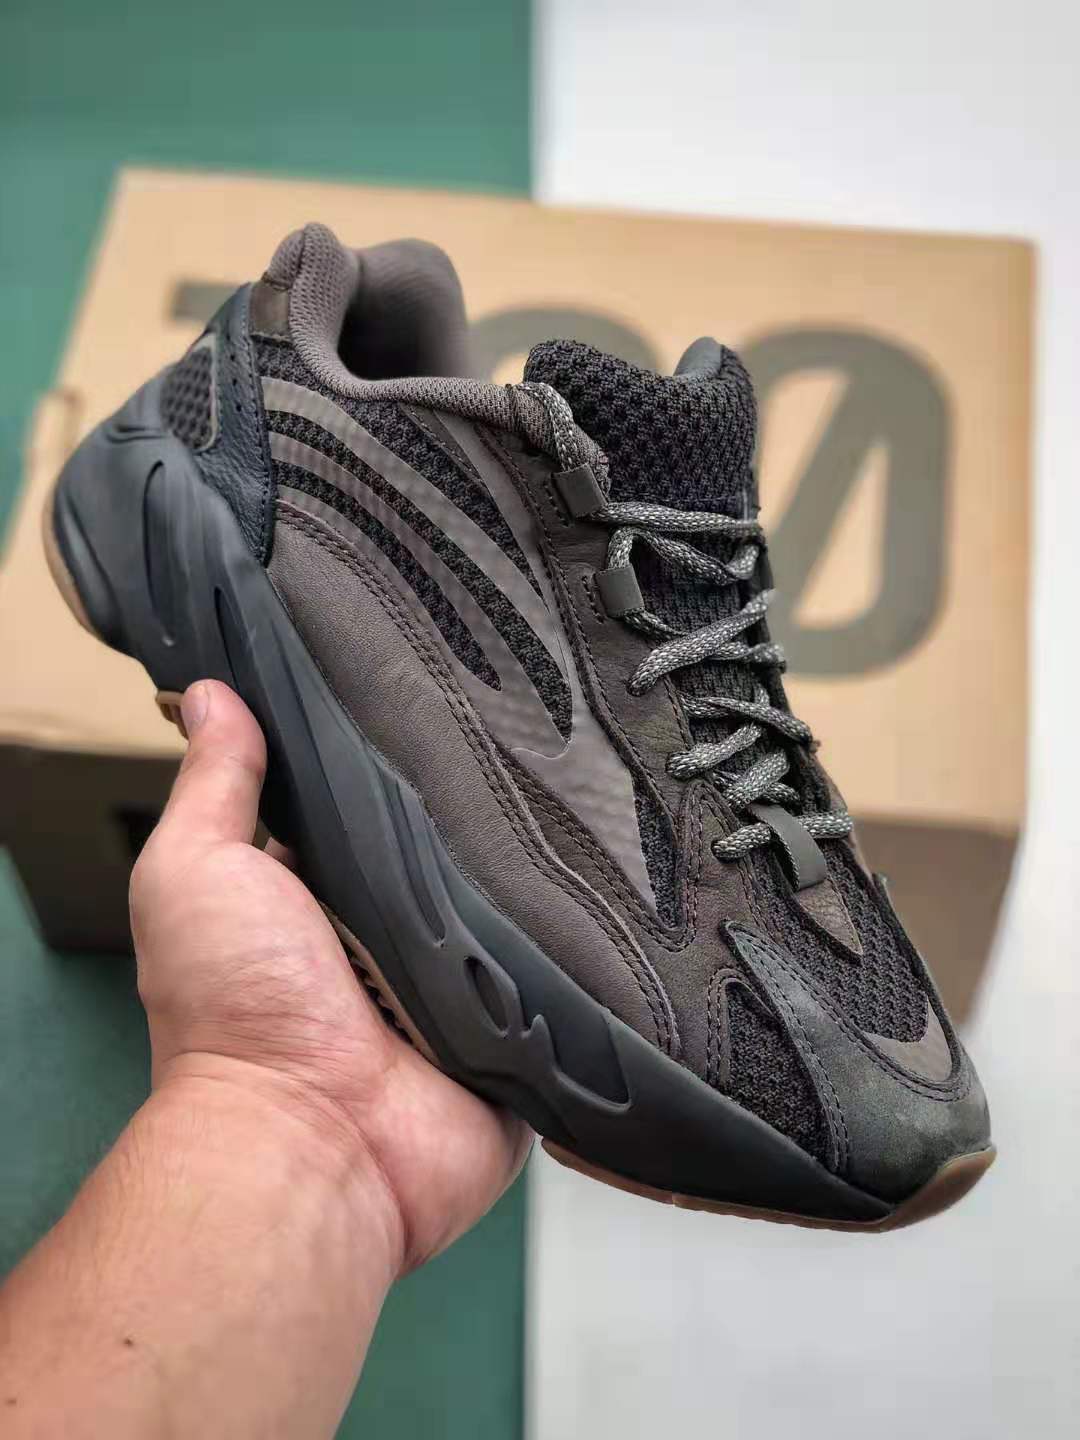 Adidas Yeezy Boost 700 V2 Geode - Shop the Latest Geode Colorway